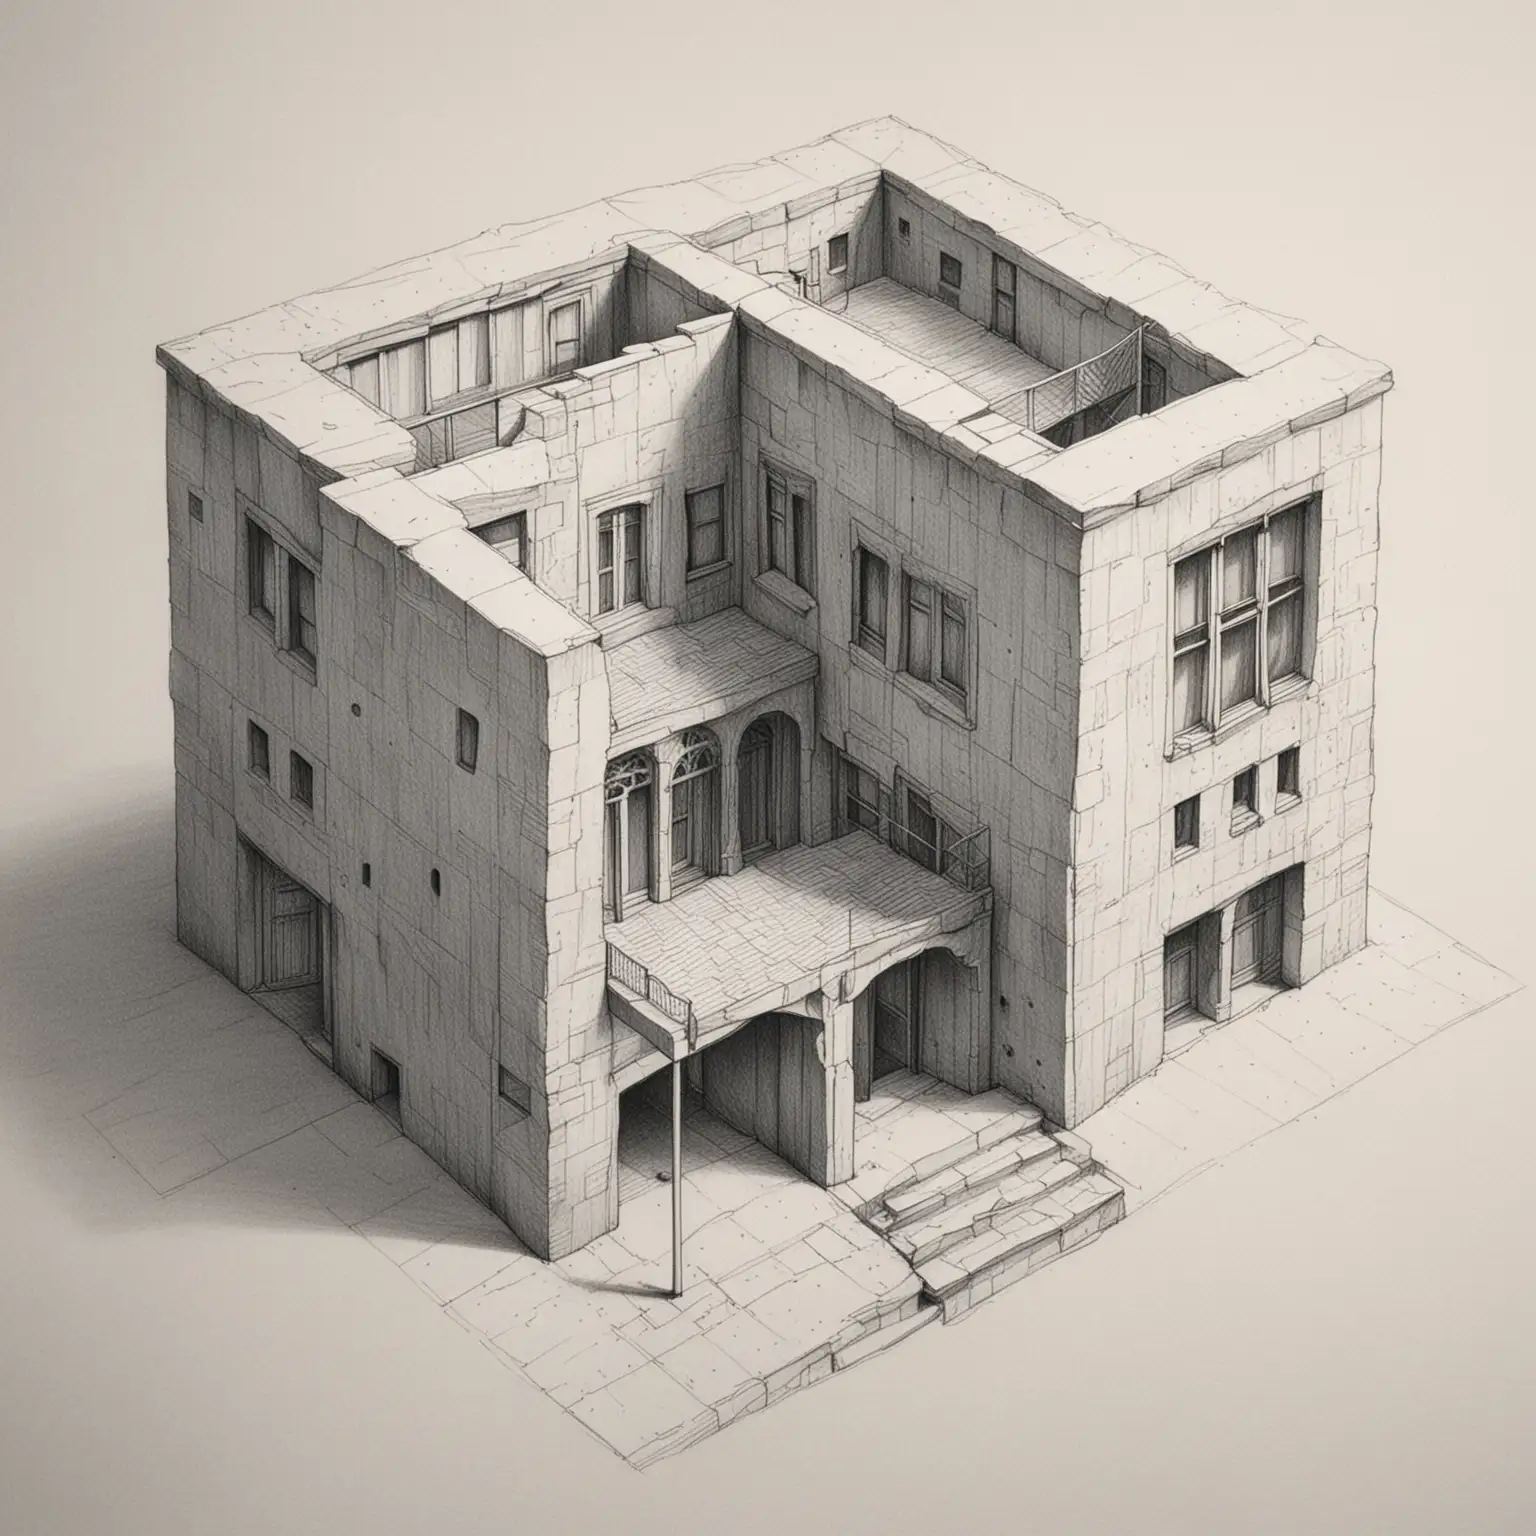 Isometric Upside Down View of Square Building with Exterior Stairs and Unique Facade Features